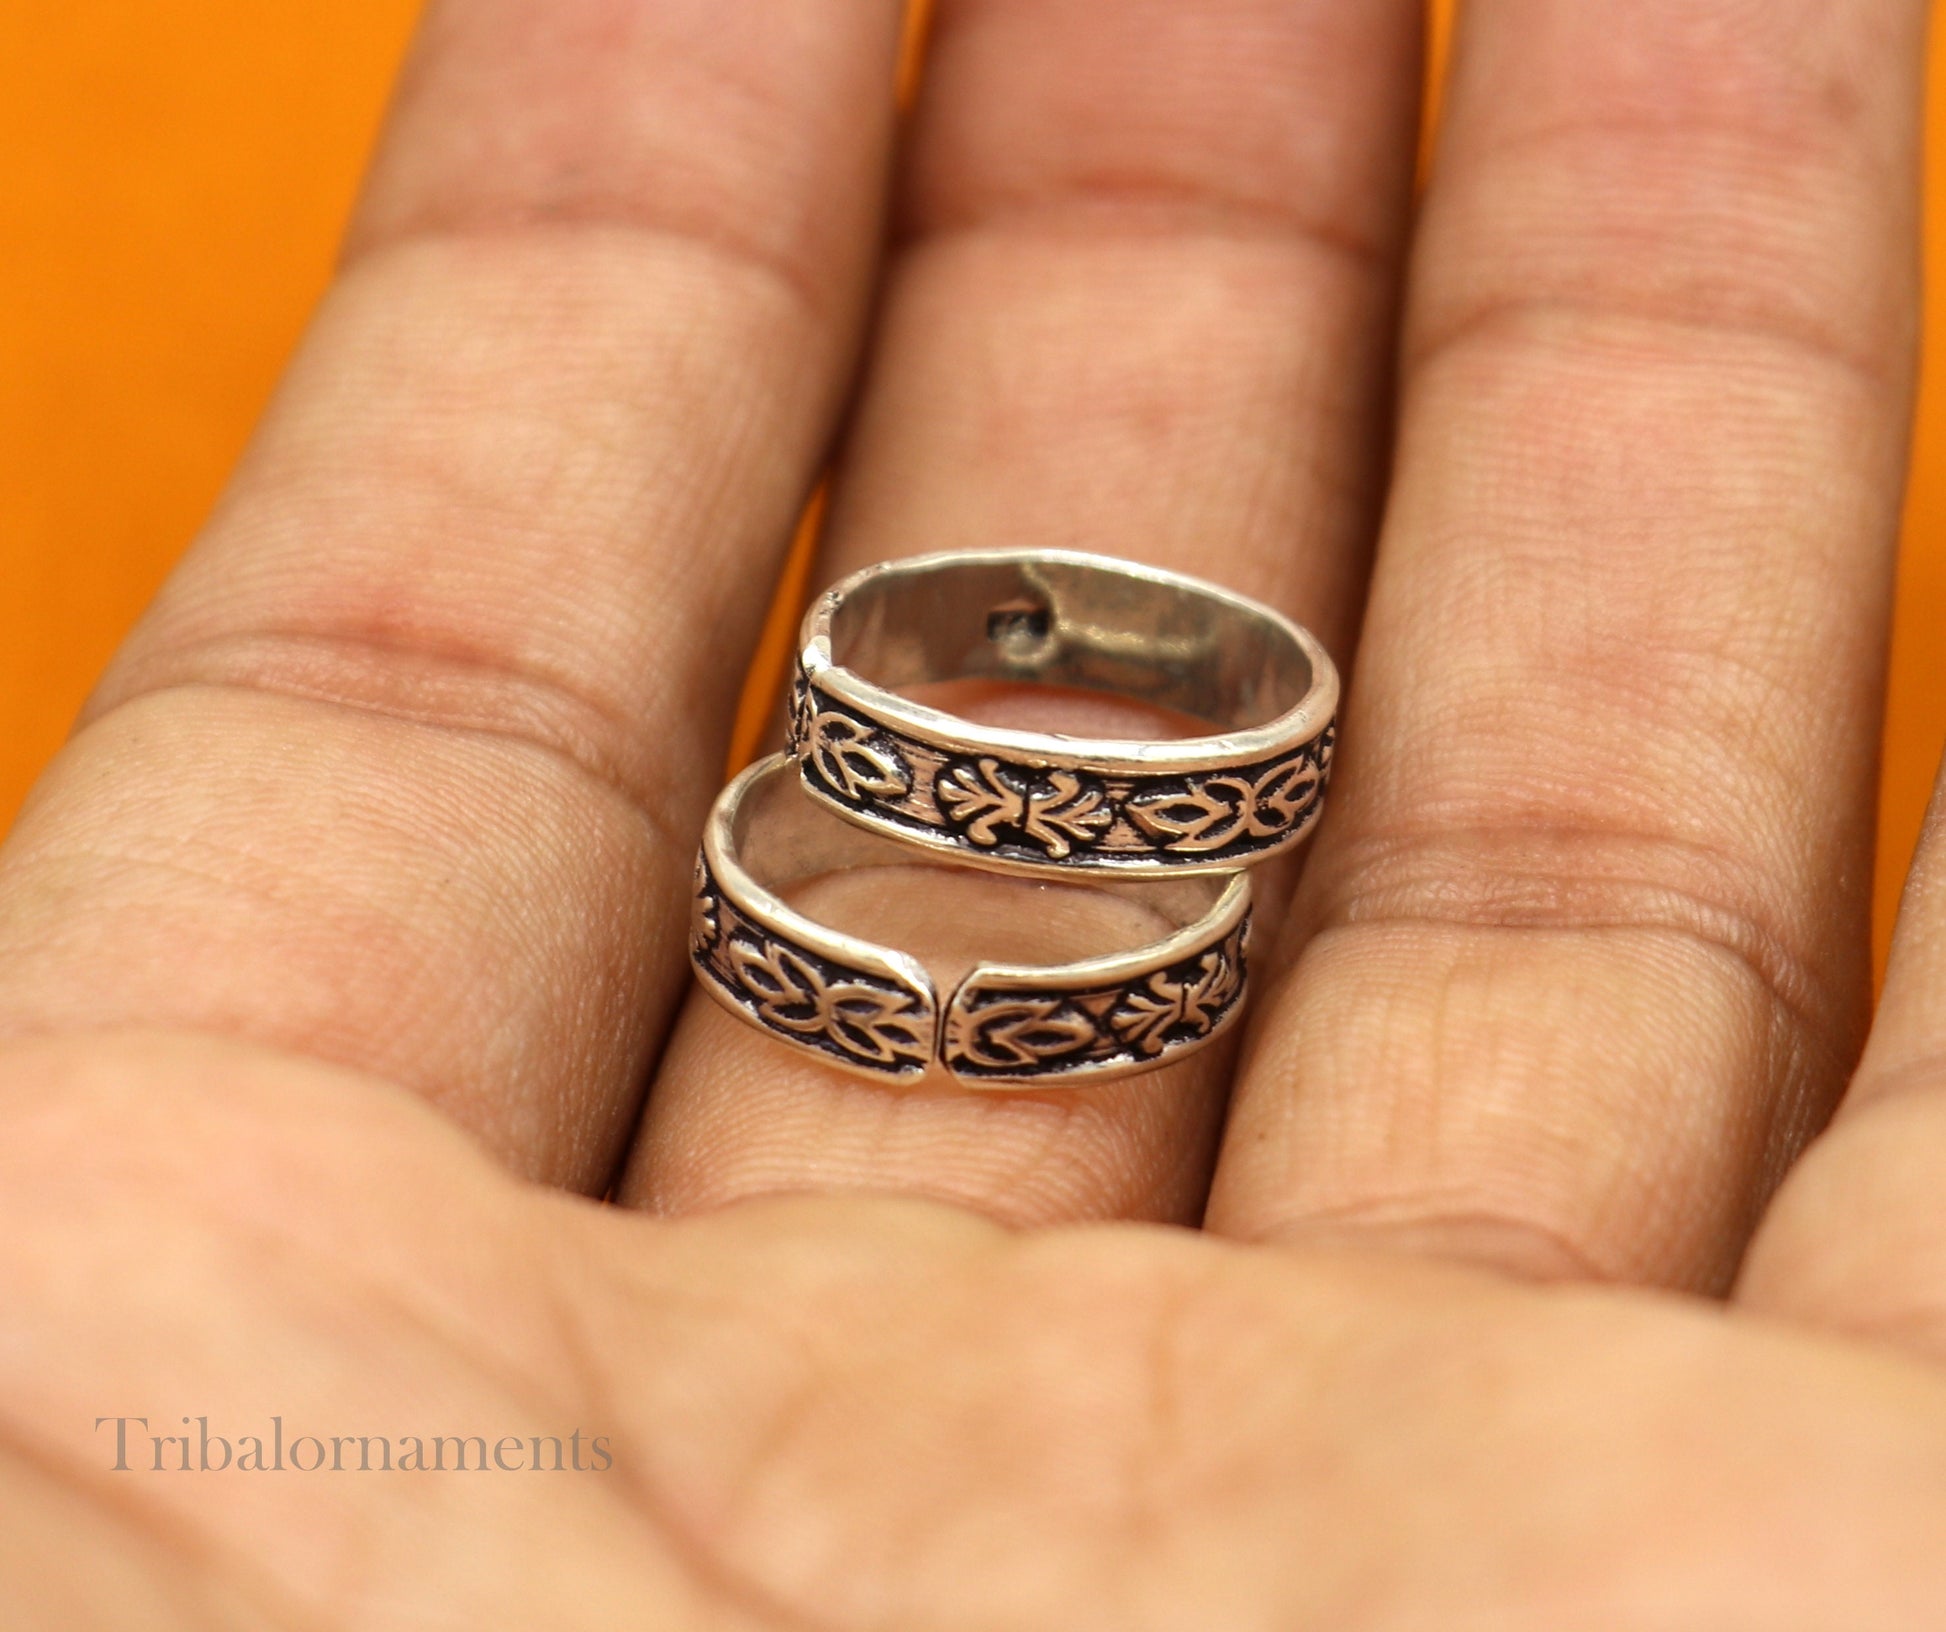 Floral design Toe ring 92.5 sterling silver handmade stunning toe ring, toe band stylish modern women's brides jewelry from india toer105 - TRIBAL ORNAMENTS